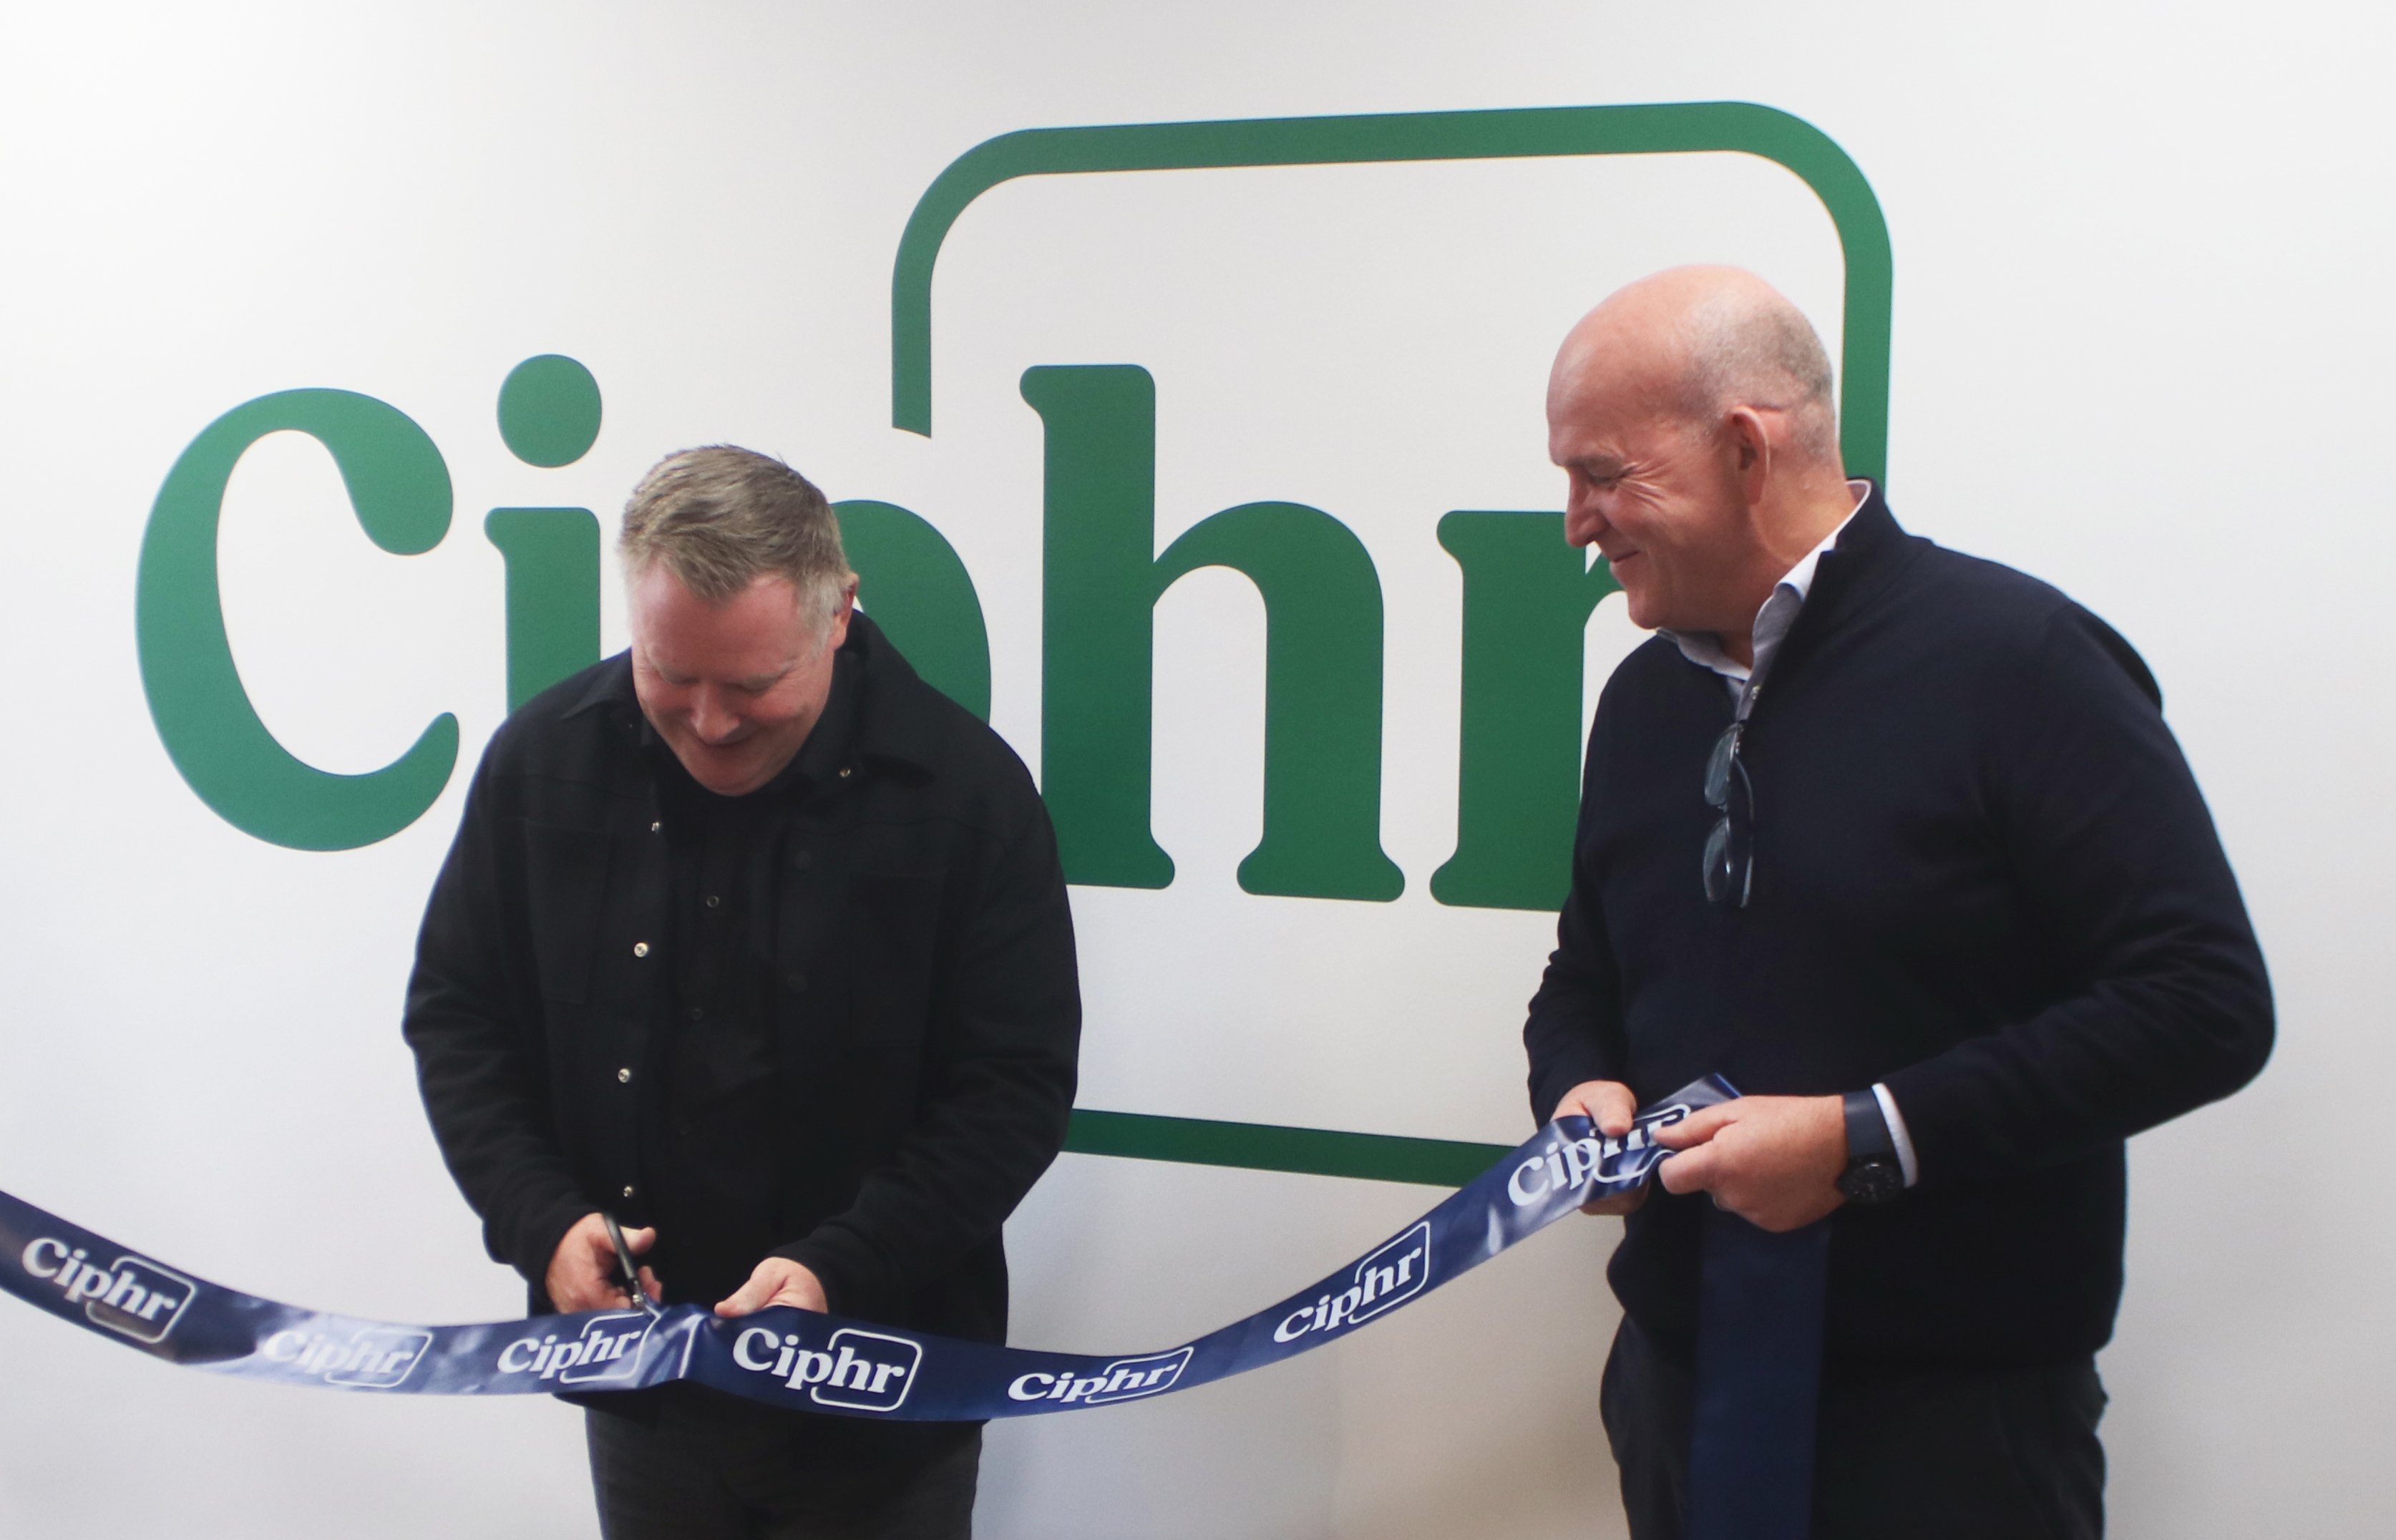 Jason Davenport, CEO of CIPP, ribbon cutting with Sion Lewis, CEO of Ciphr